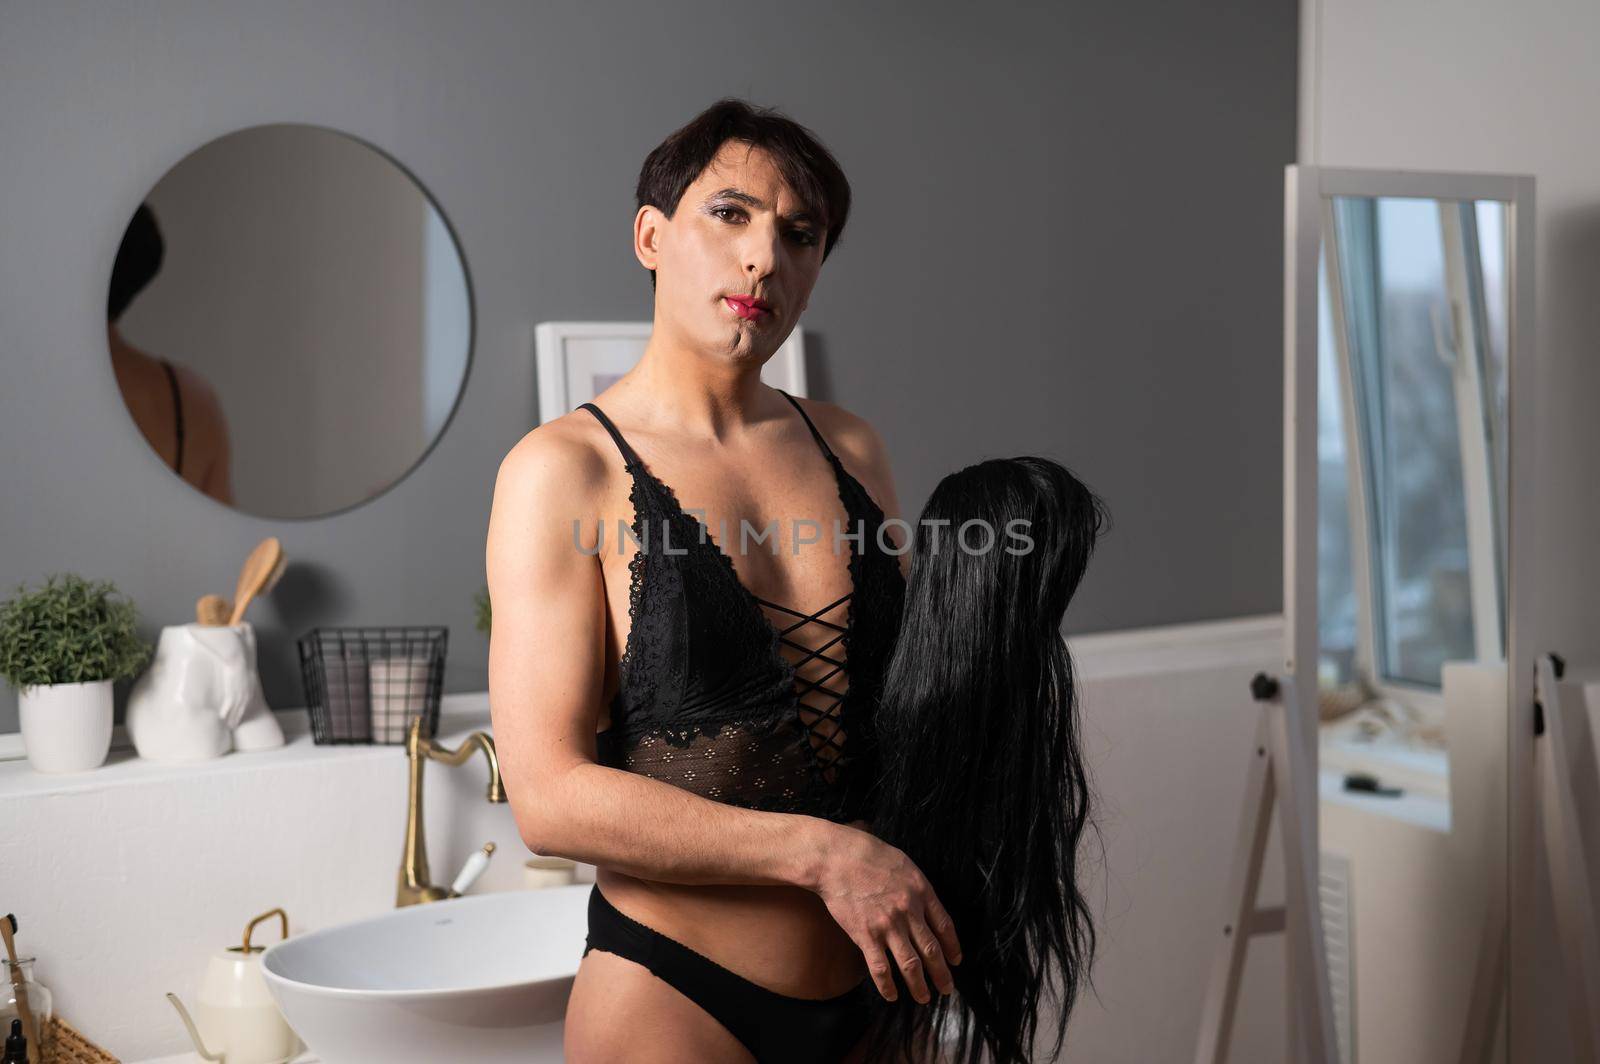 Homosexual preening in front of the mirror. A transgender man combing a wig. by mrwed54